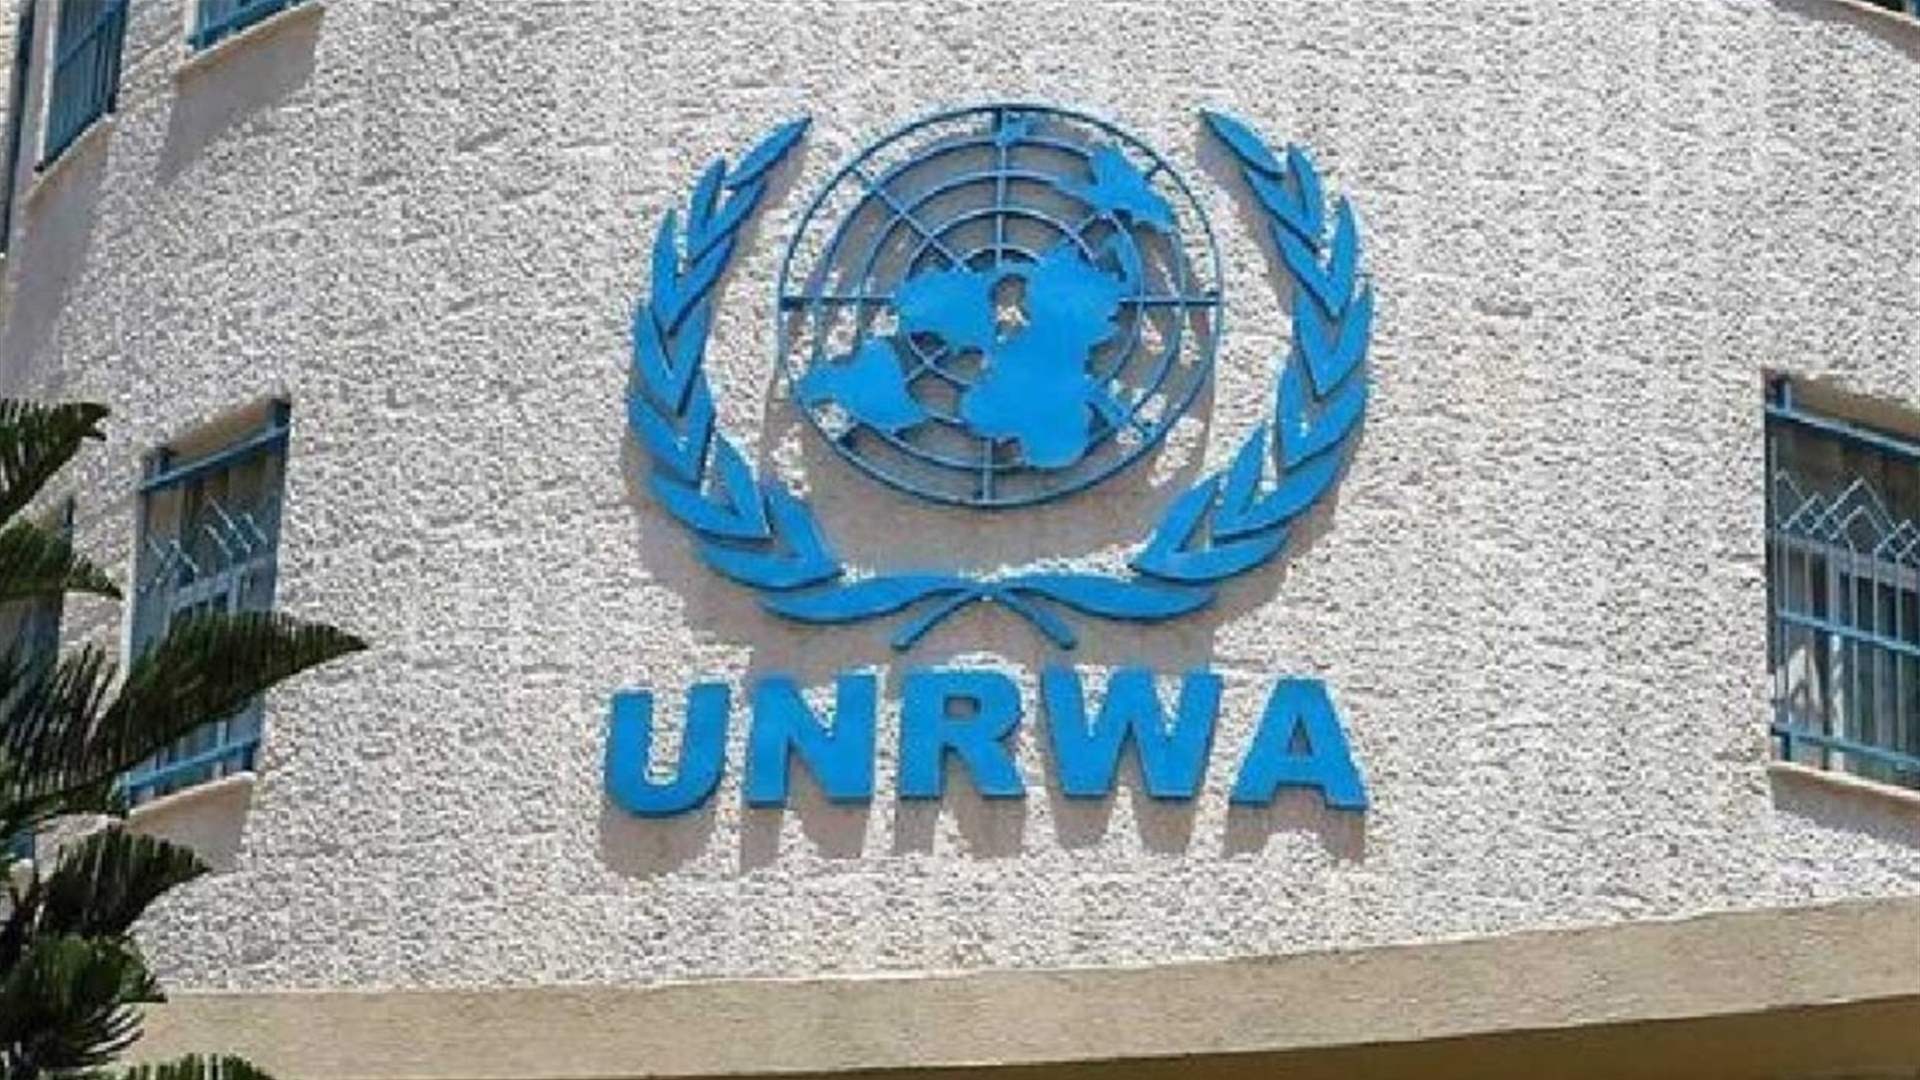 Israeli Finance Minister announces cancellation of tax exemptions for UNRWA